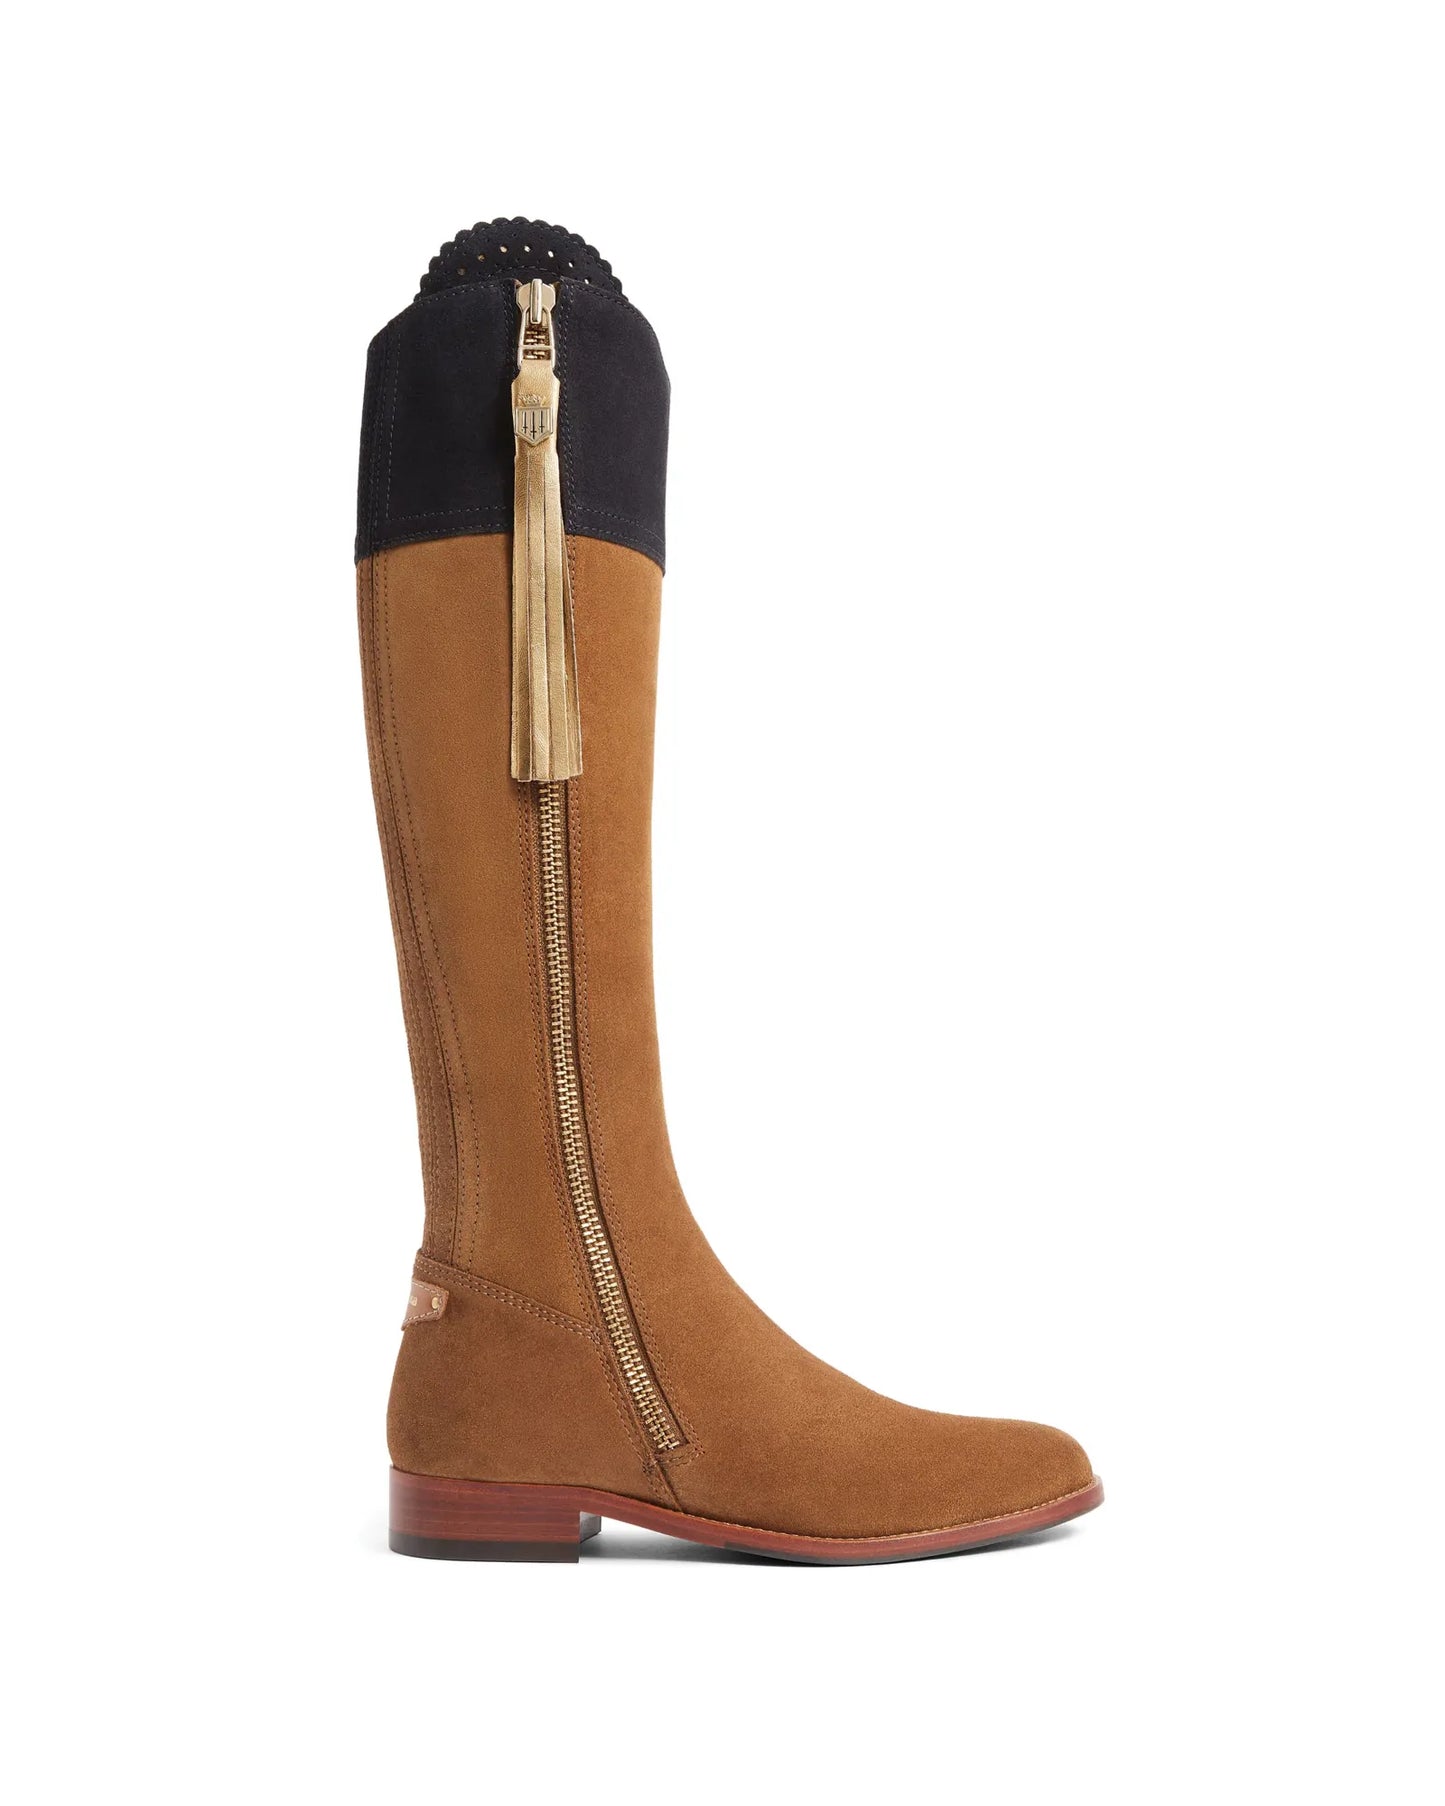 The Regina Narrow Fit Boot - Tan, Navy & Gold Suede